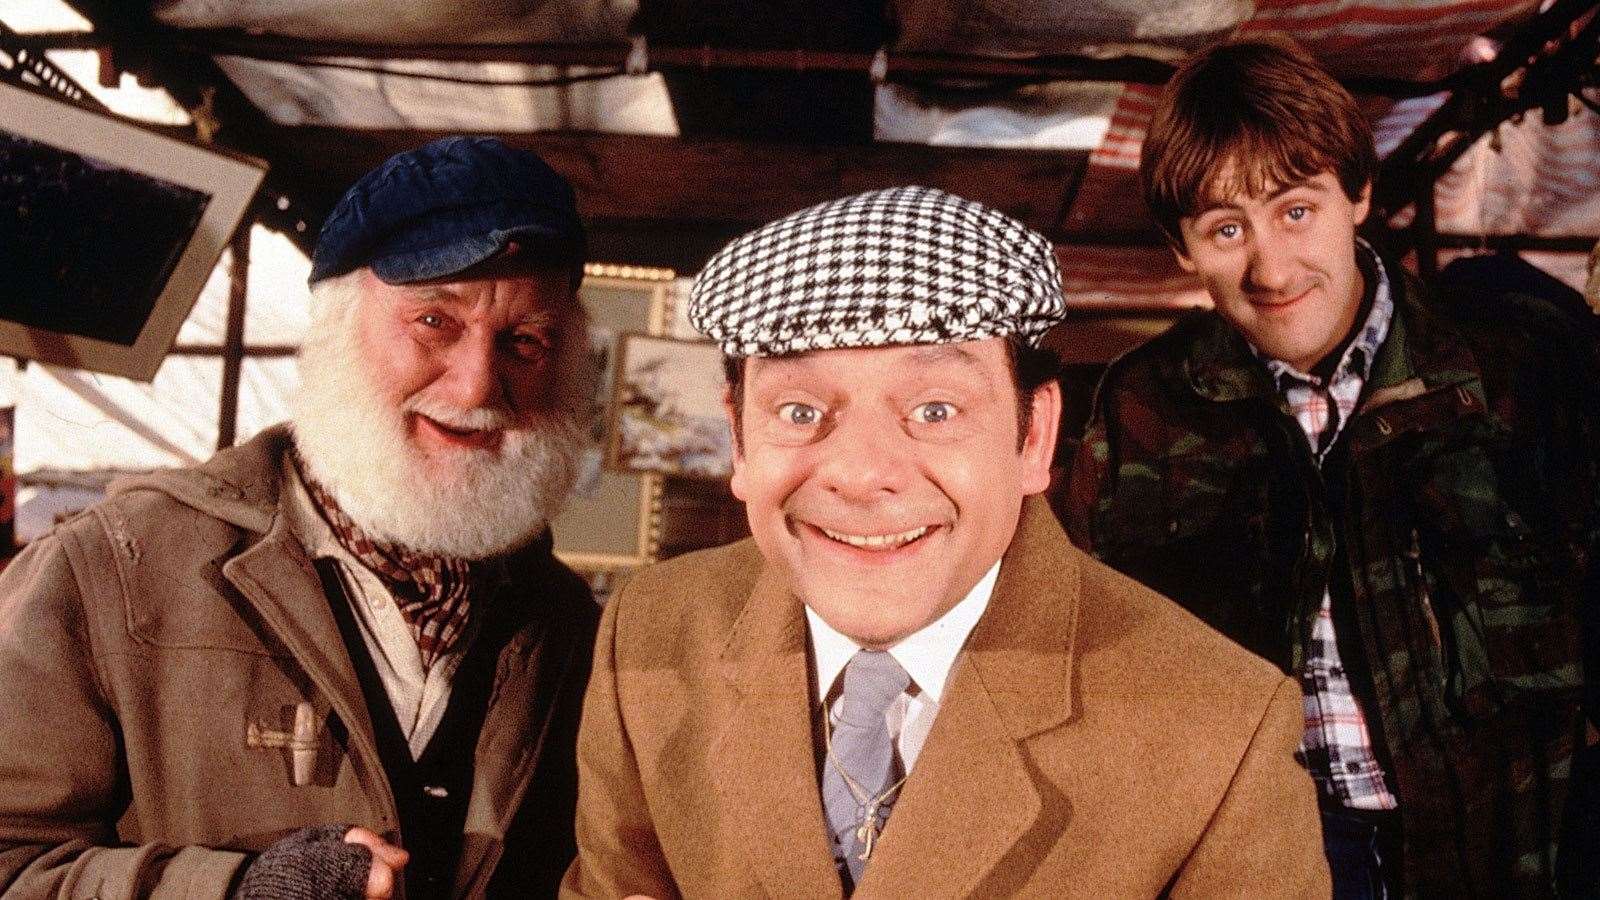 An Only Fools and Horses exhibition is coming to Dreamland. Picture: Gold/BBC